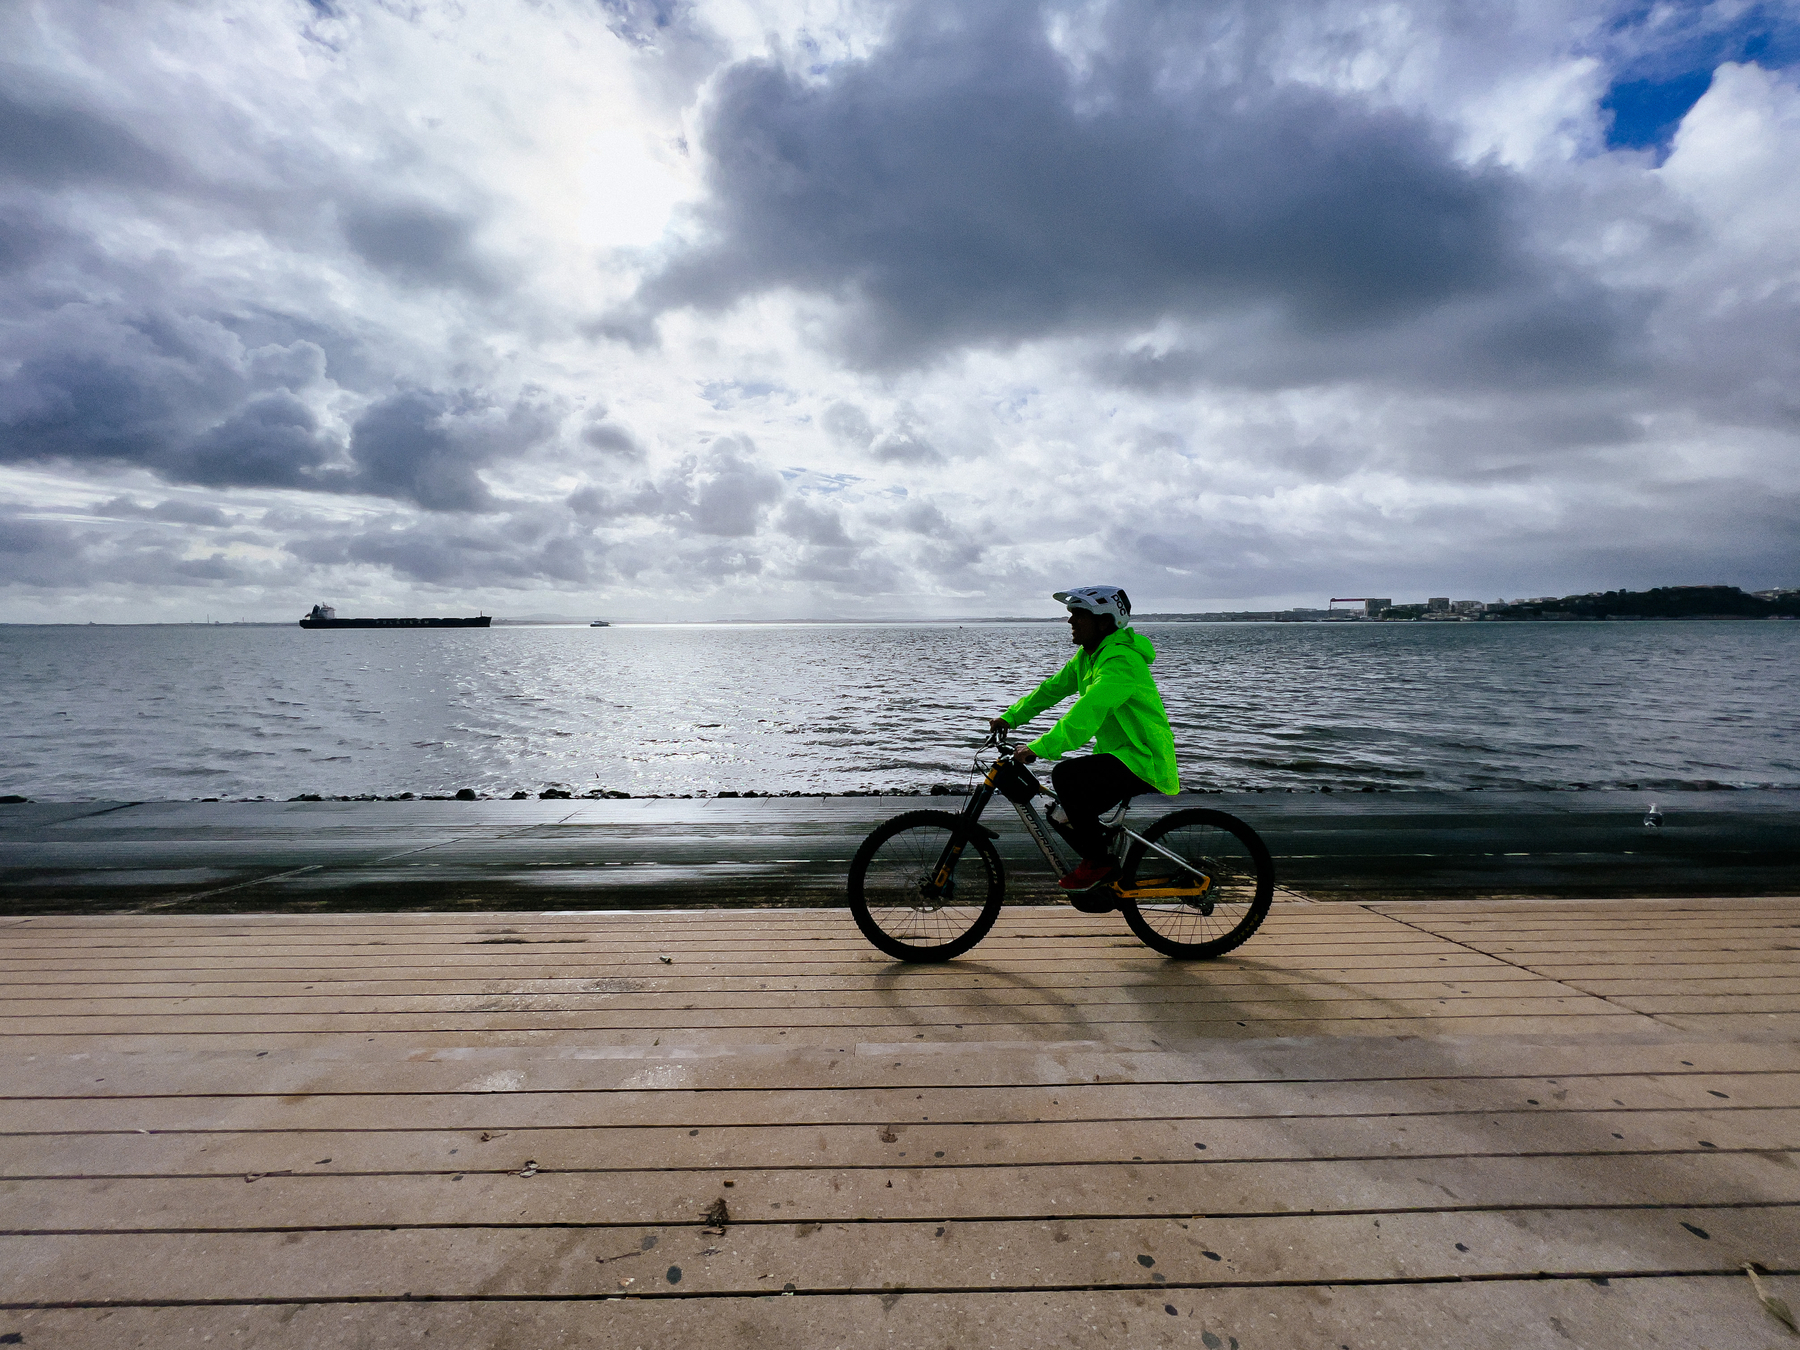 A cyclist rides along the river, on a cloudy day